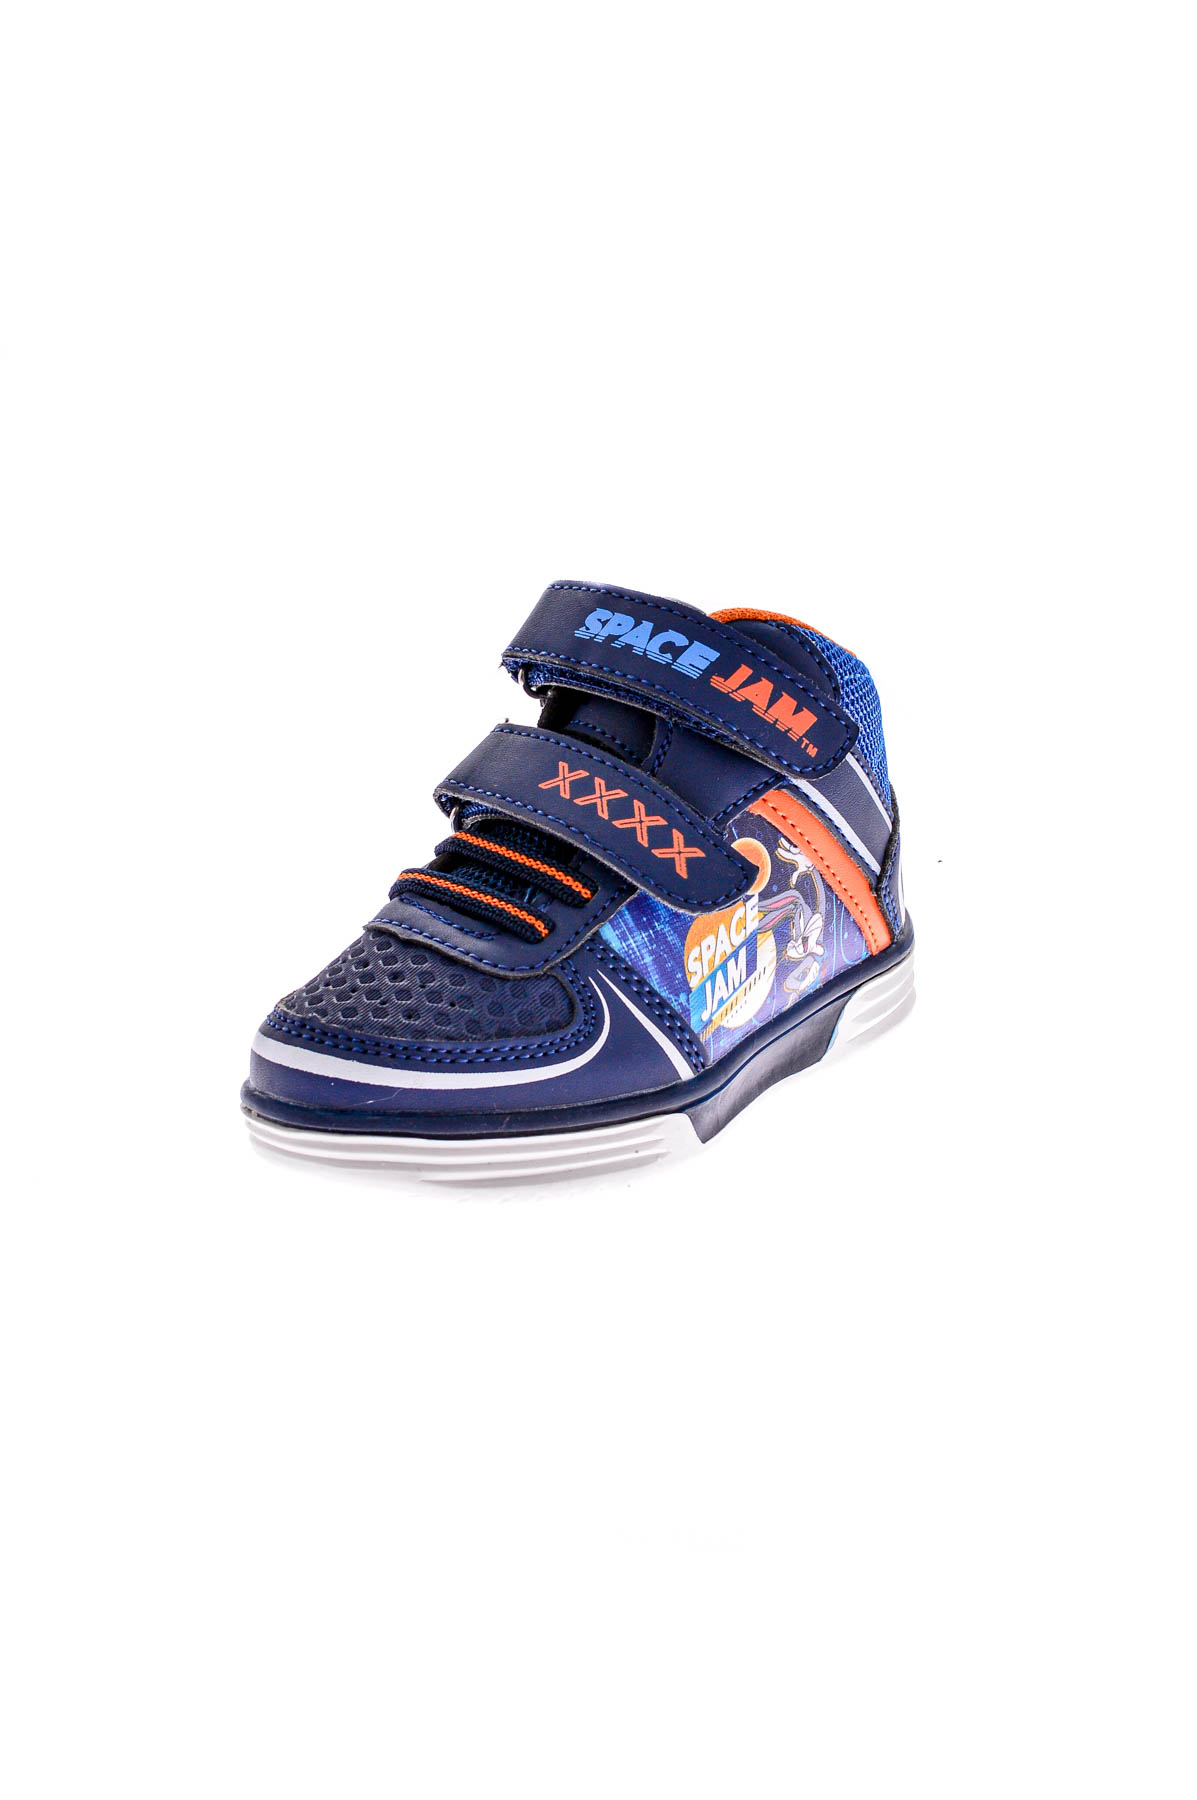 Kids' Shoes - SPACE JAM - 1